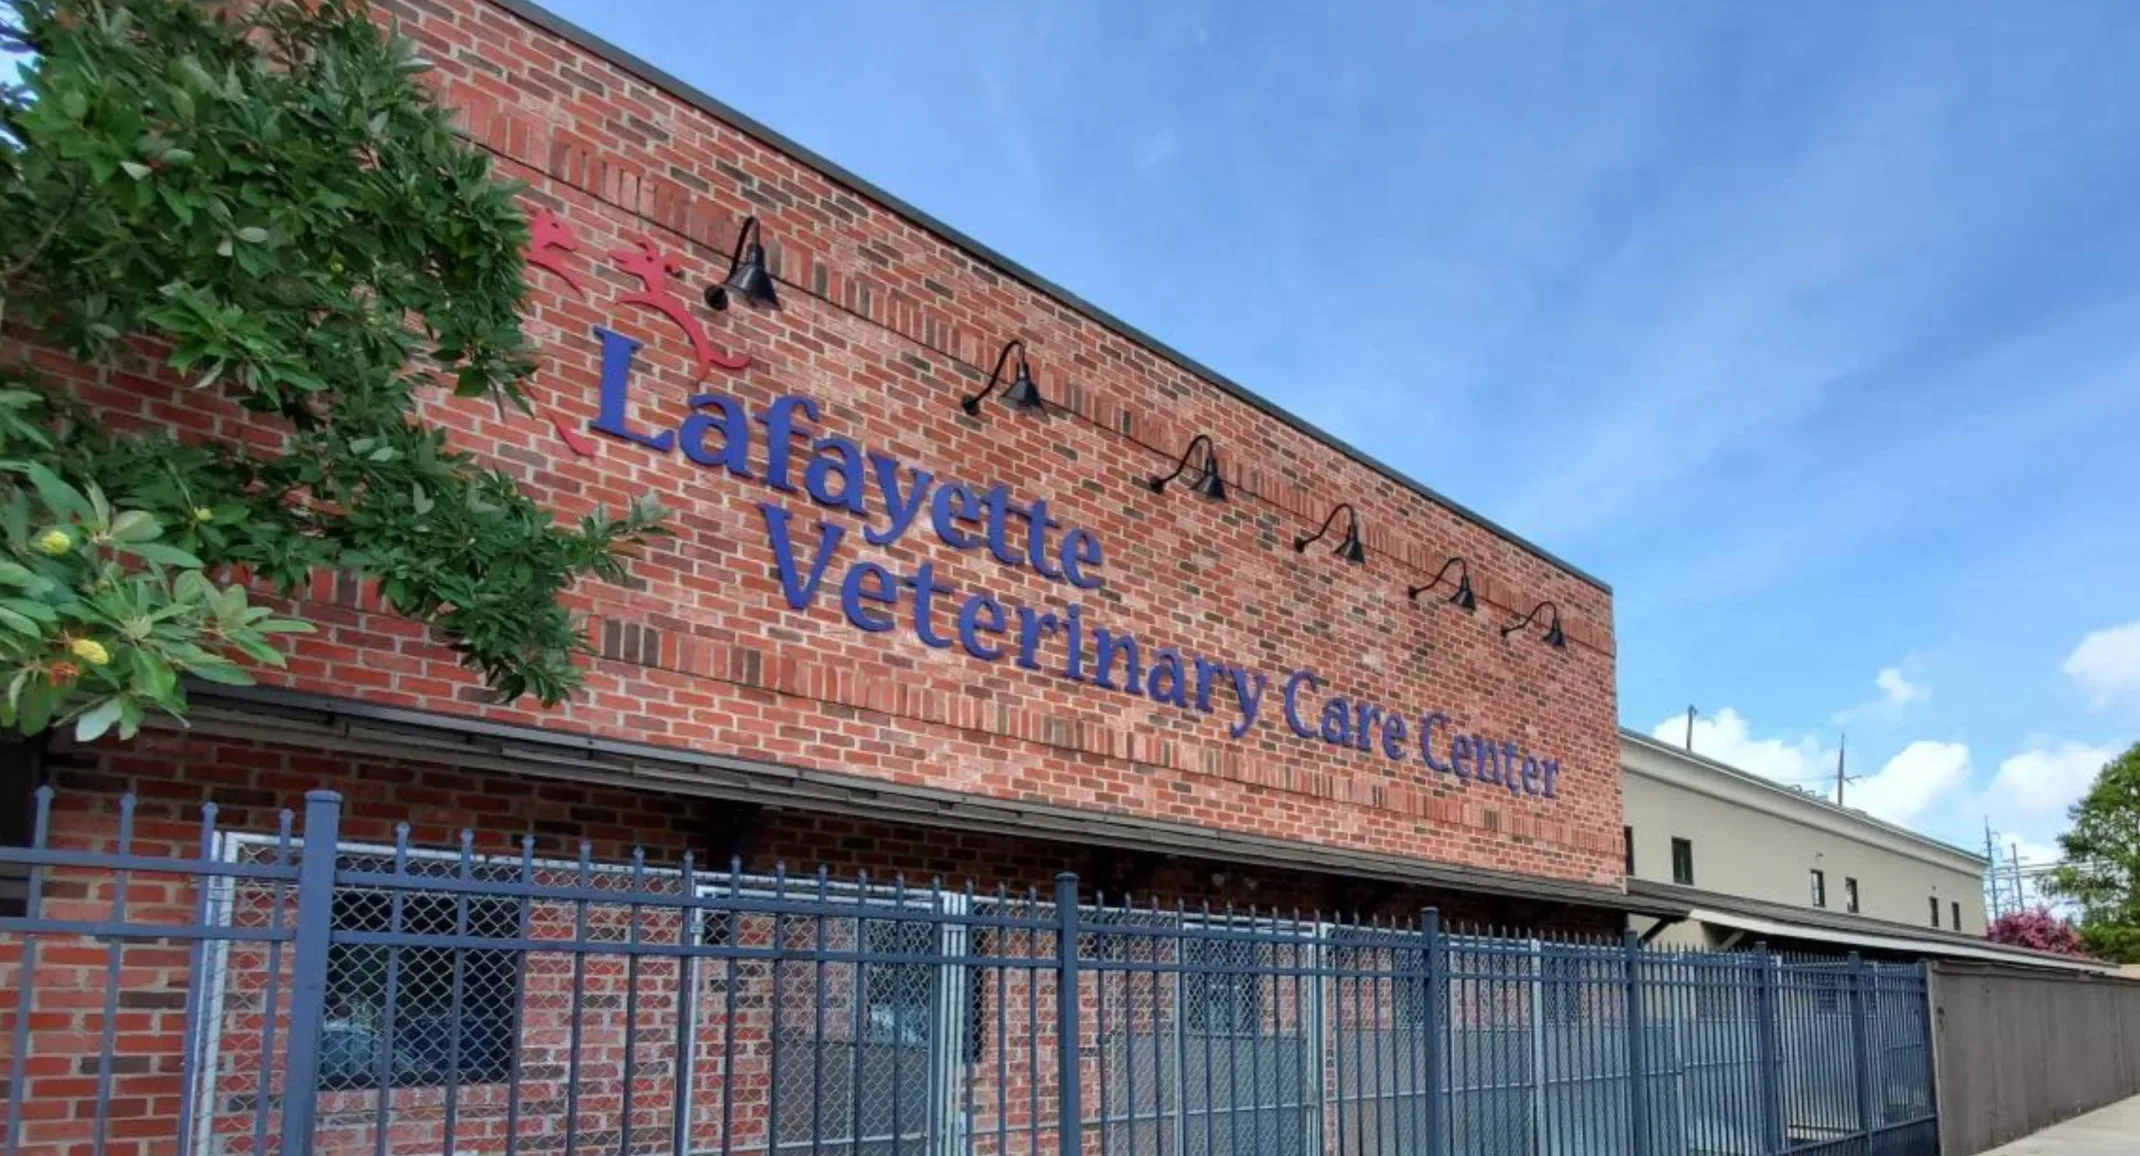 Front view of brick building with Lafayette Veterinary Care Center in large blue letters. 